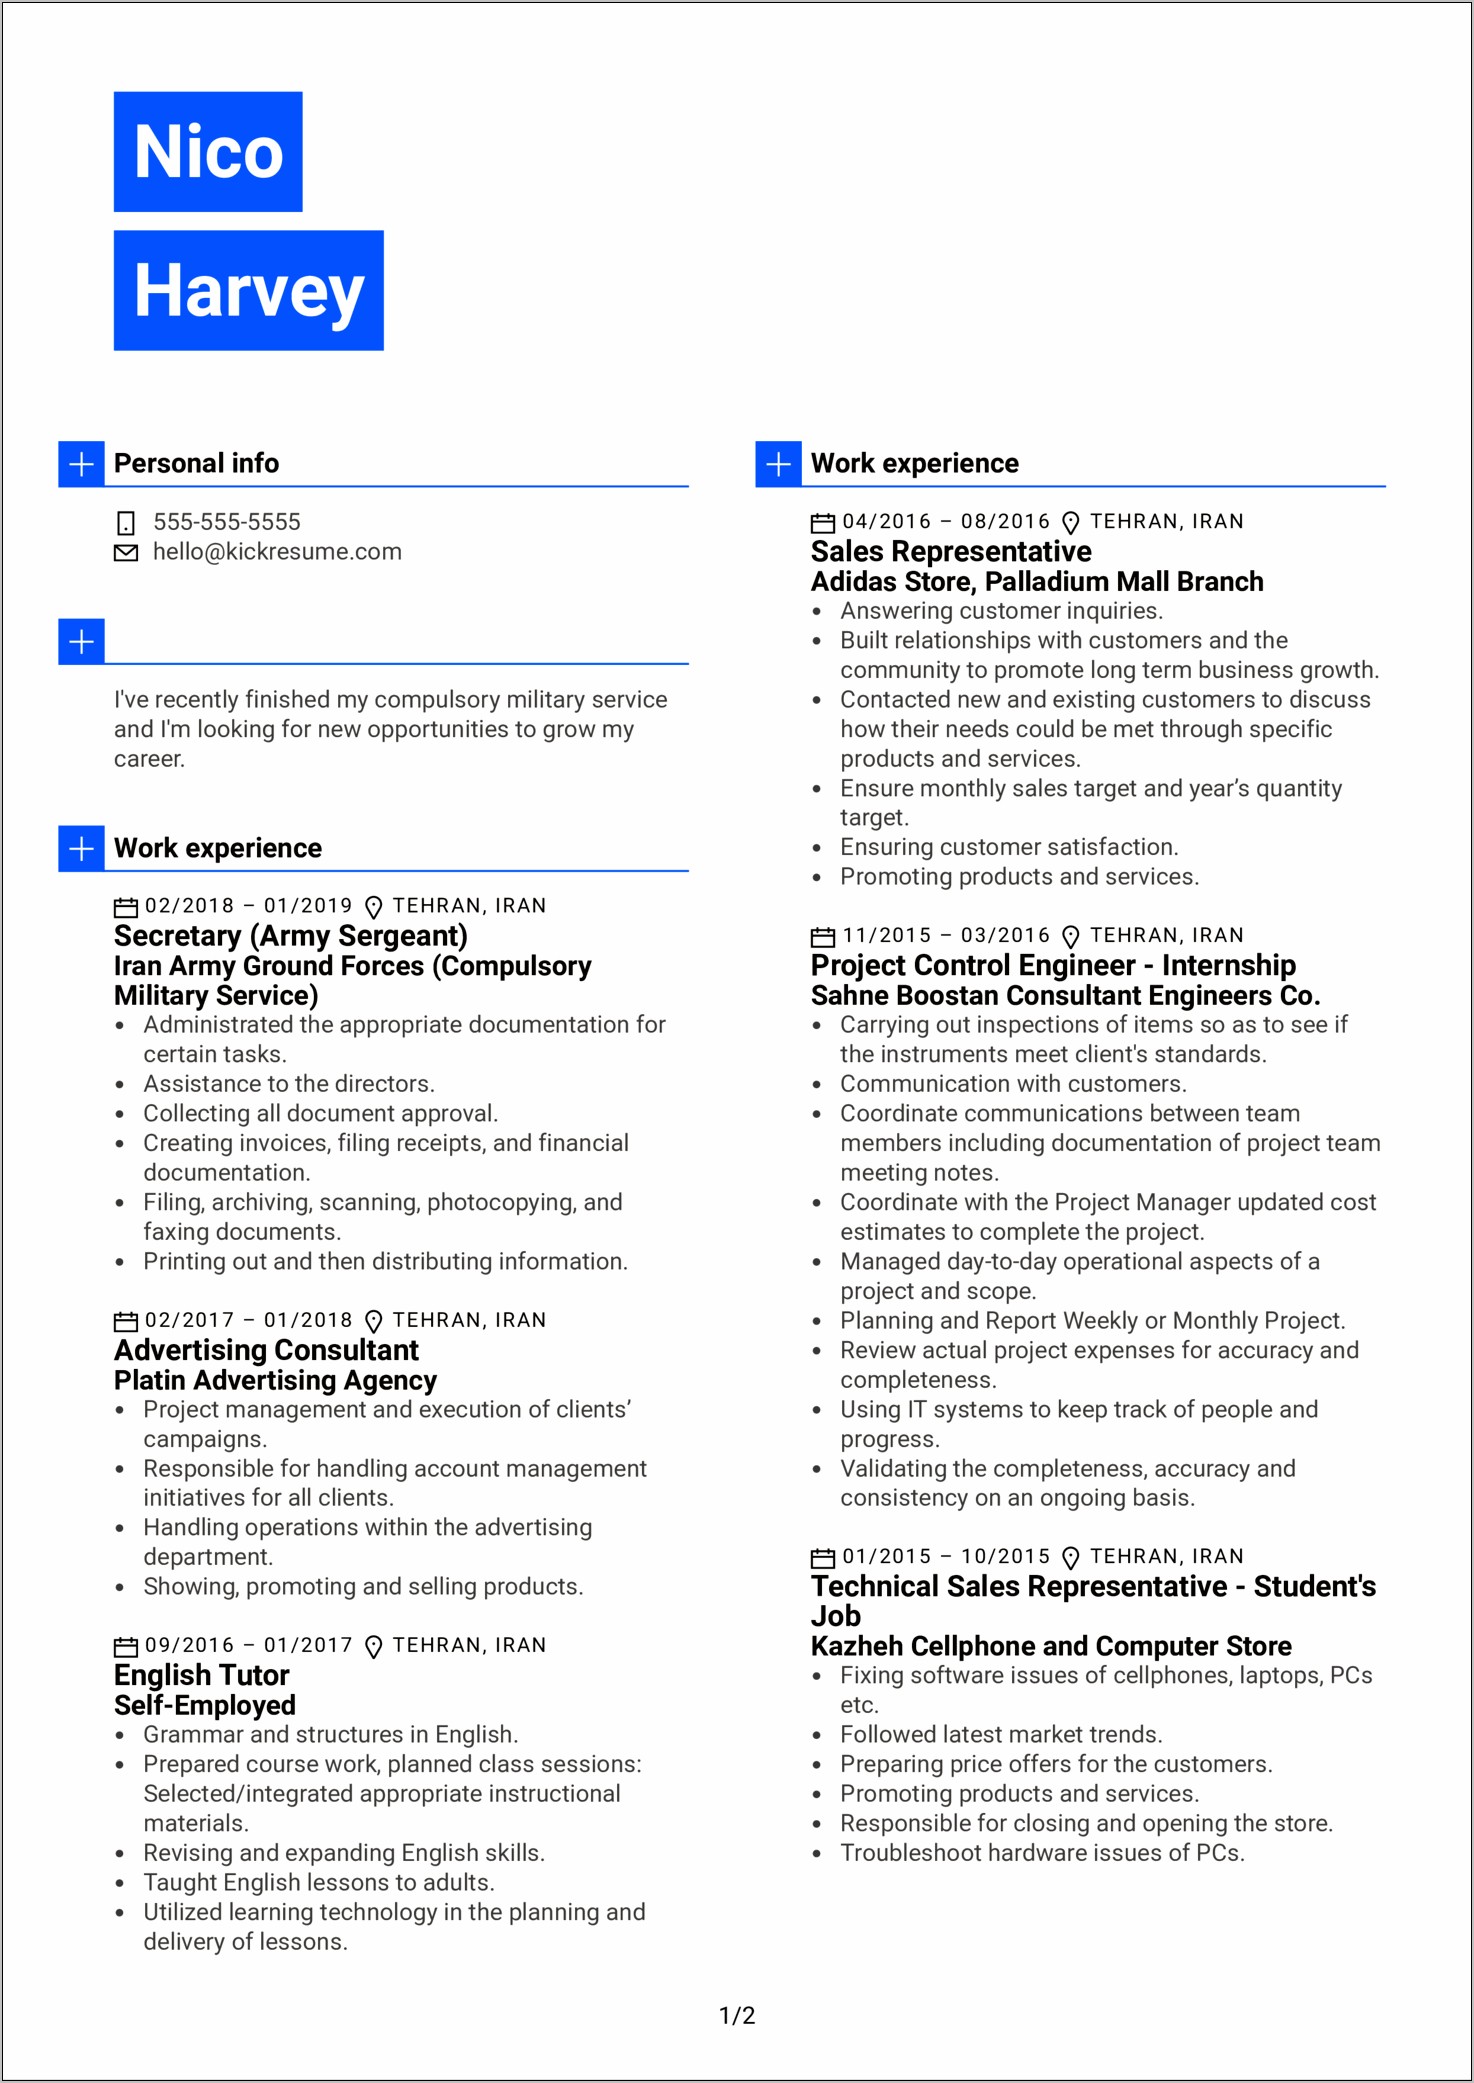 Example Of Imaging Pcs On A Resume